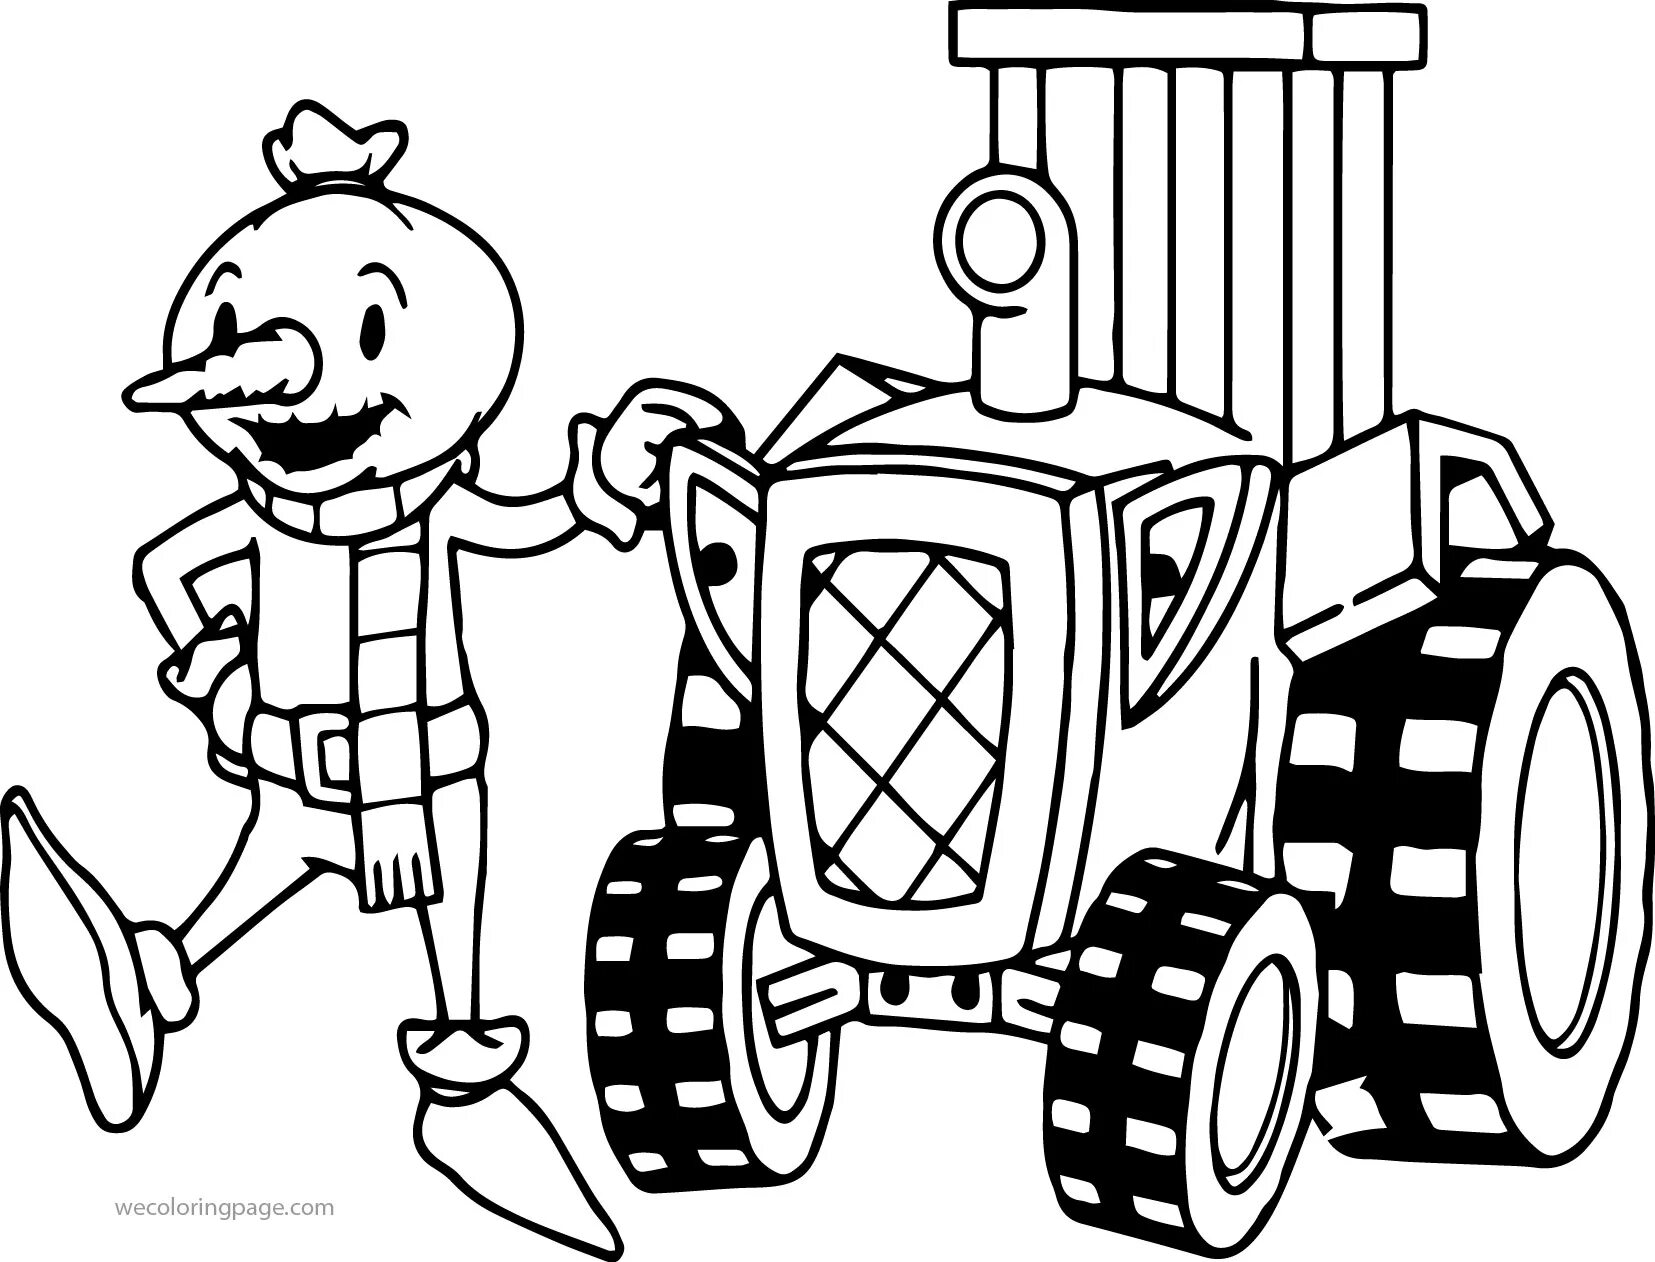 Sleek blue gosh tractor coloring page